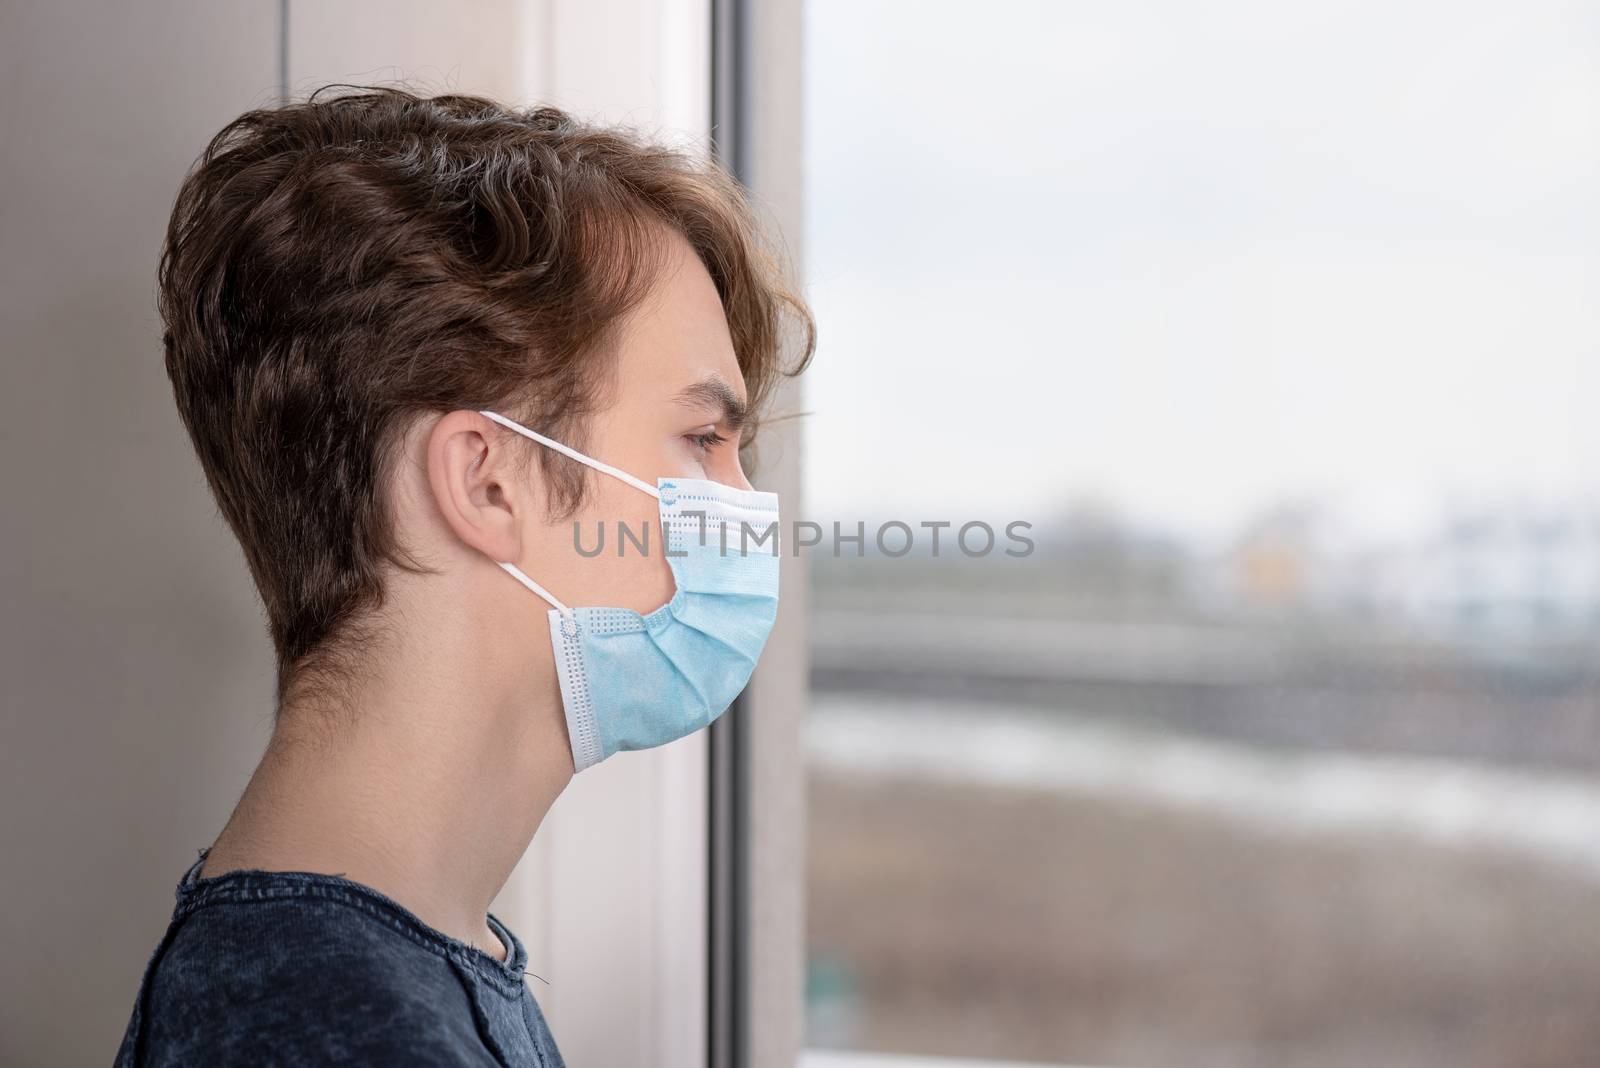 Concept of coronavirus quarantine. Child wearing medical protective face mask during flu virus, looking out of window. COVID-19 - self isolation. Teen boy forced to stay at home.